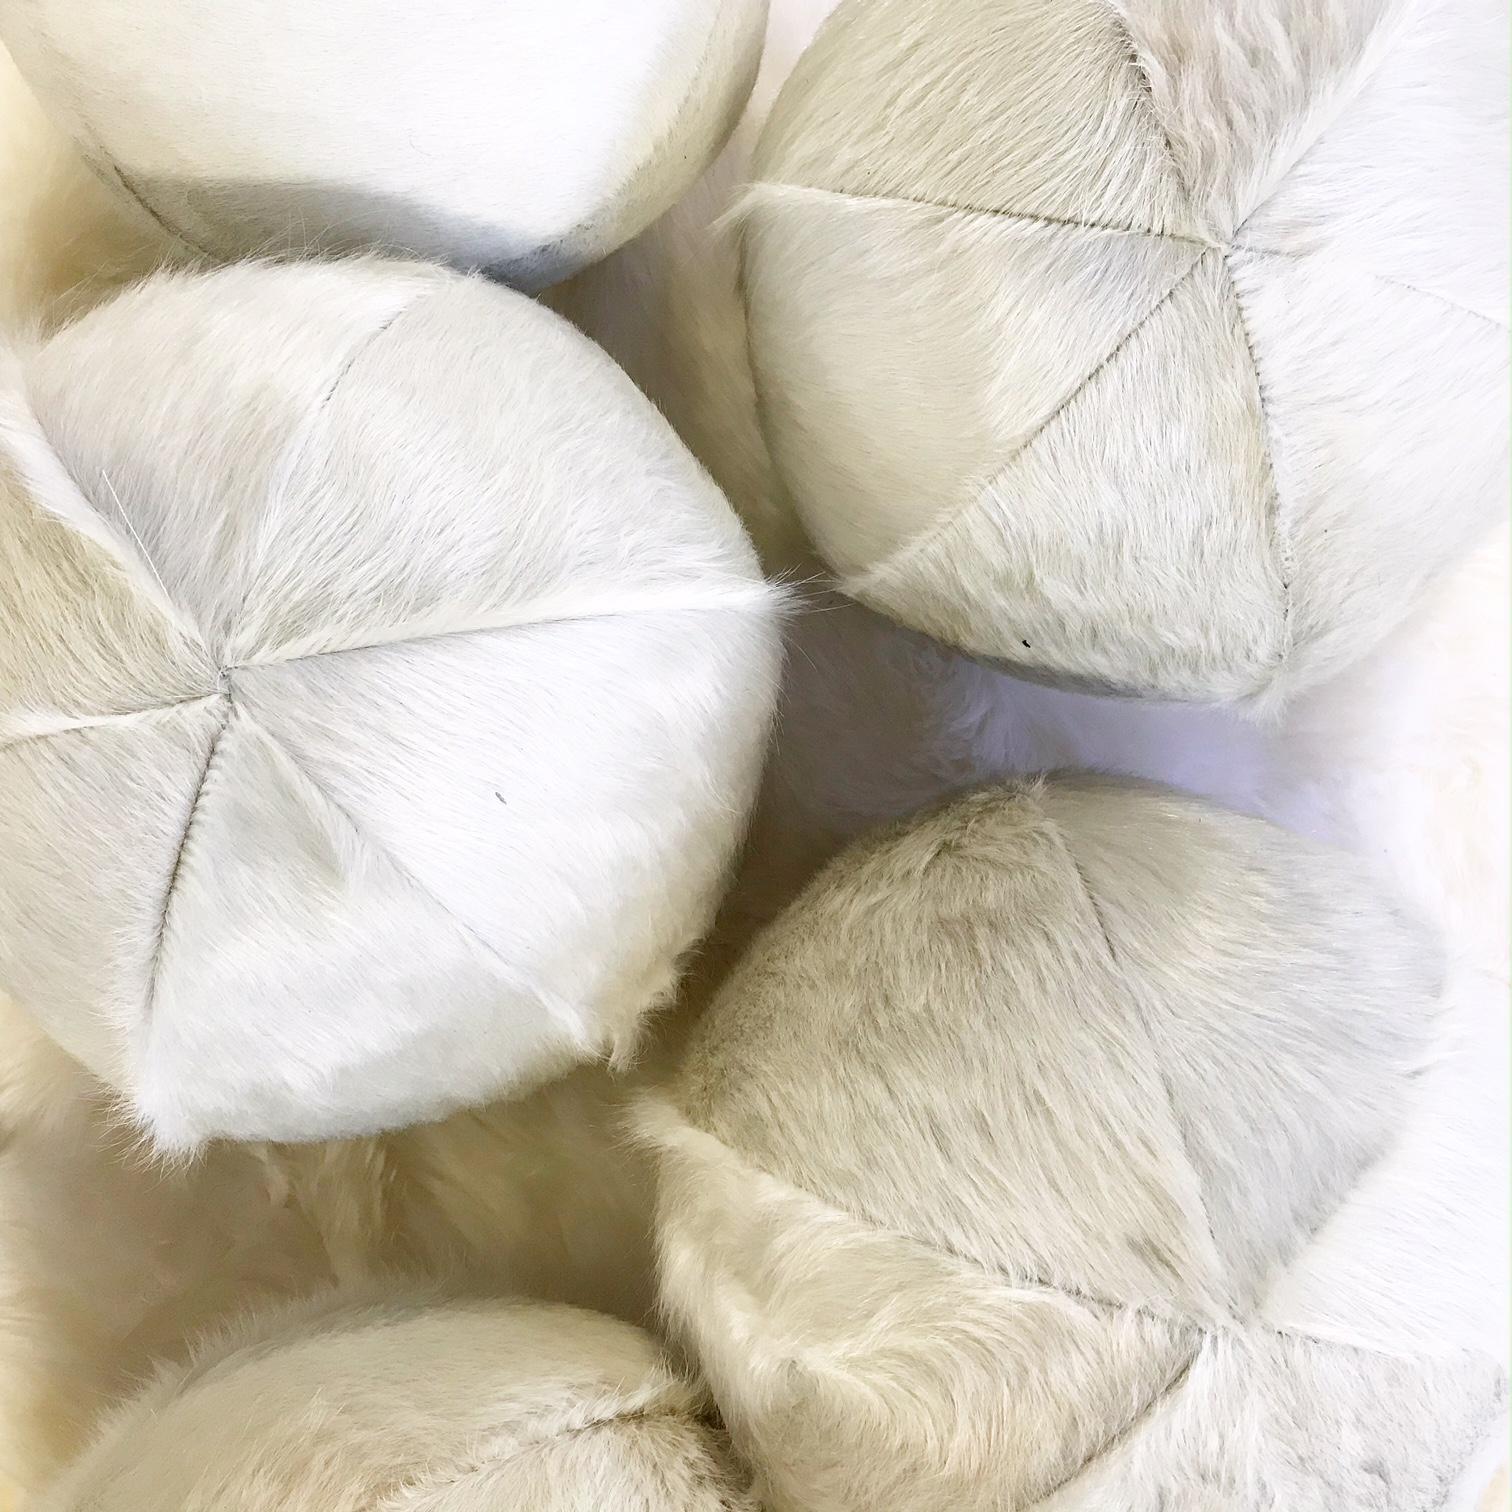 Our cowhide balls are handcrafted from our beautiful Forsyth Brazilian cowhides. The most beautiful hides are selected, hand cut, hand stitched, and hand stuffed with the finest insert. Each step is meticulously curated by Saint Louis based Forsyth